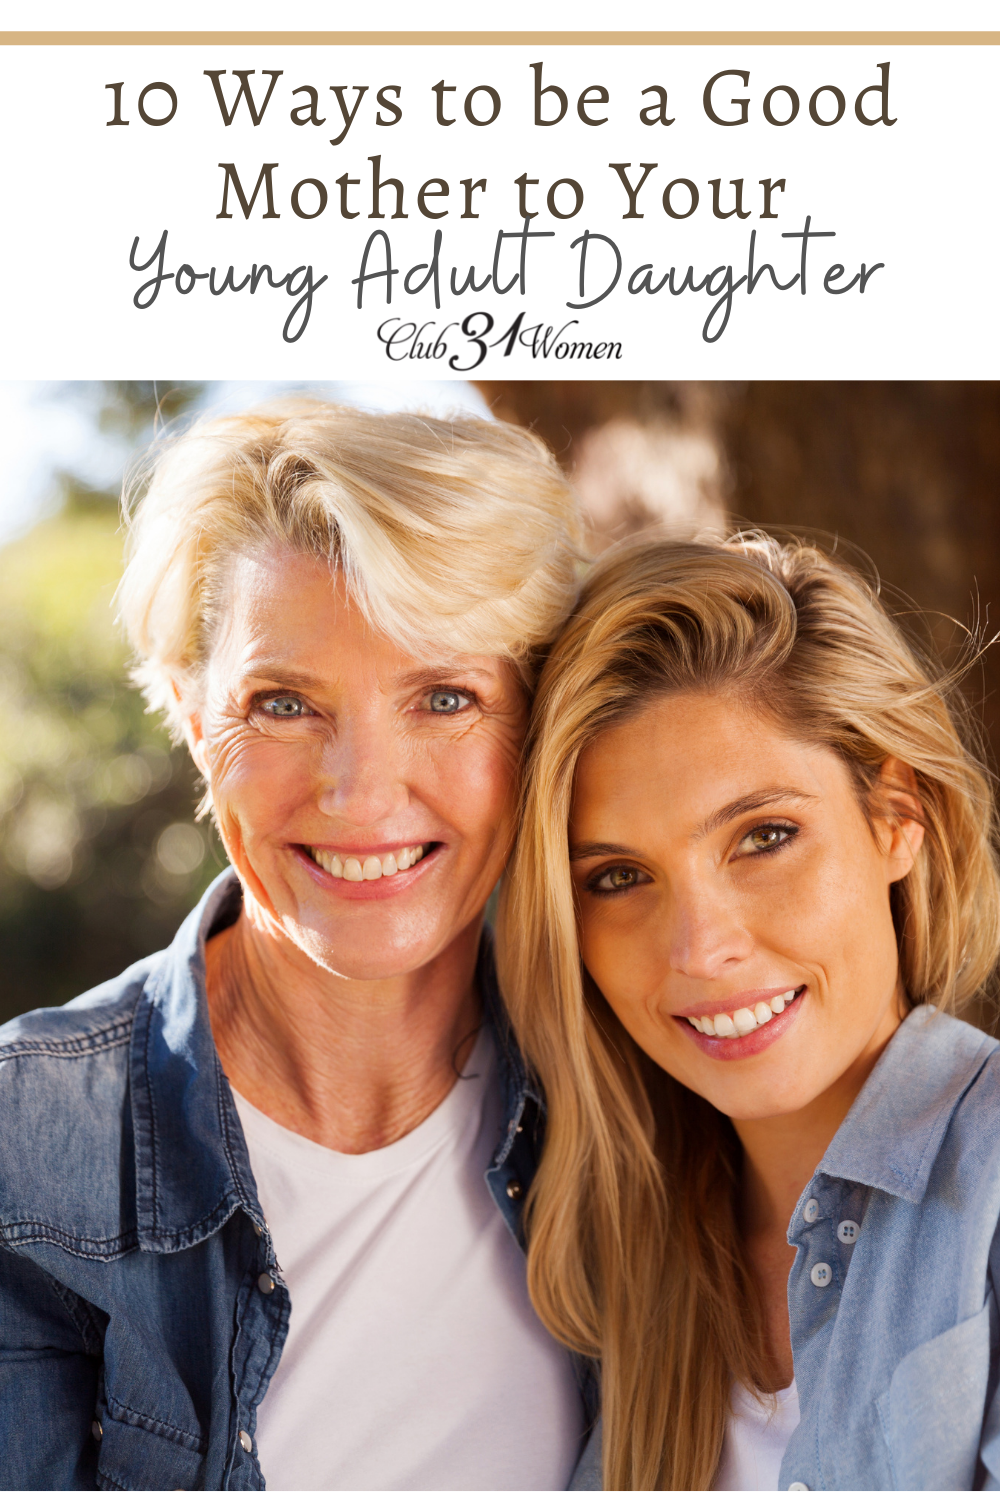 If you're going through a hard season in your relationship with your young adult daughter, take heart. Some creative ideas for nurturing your relationship. via @Club31Women